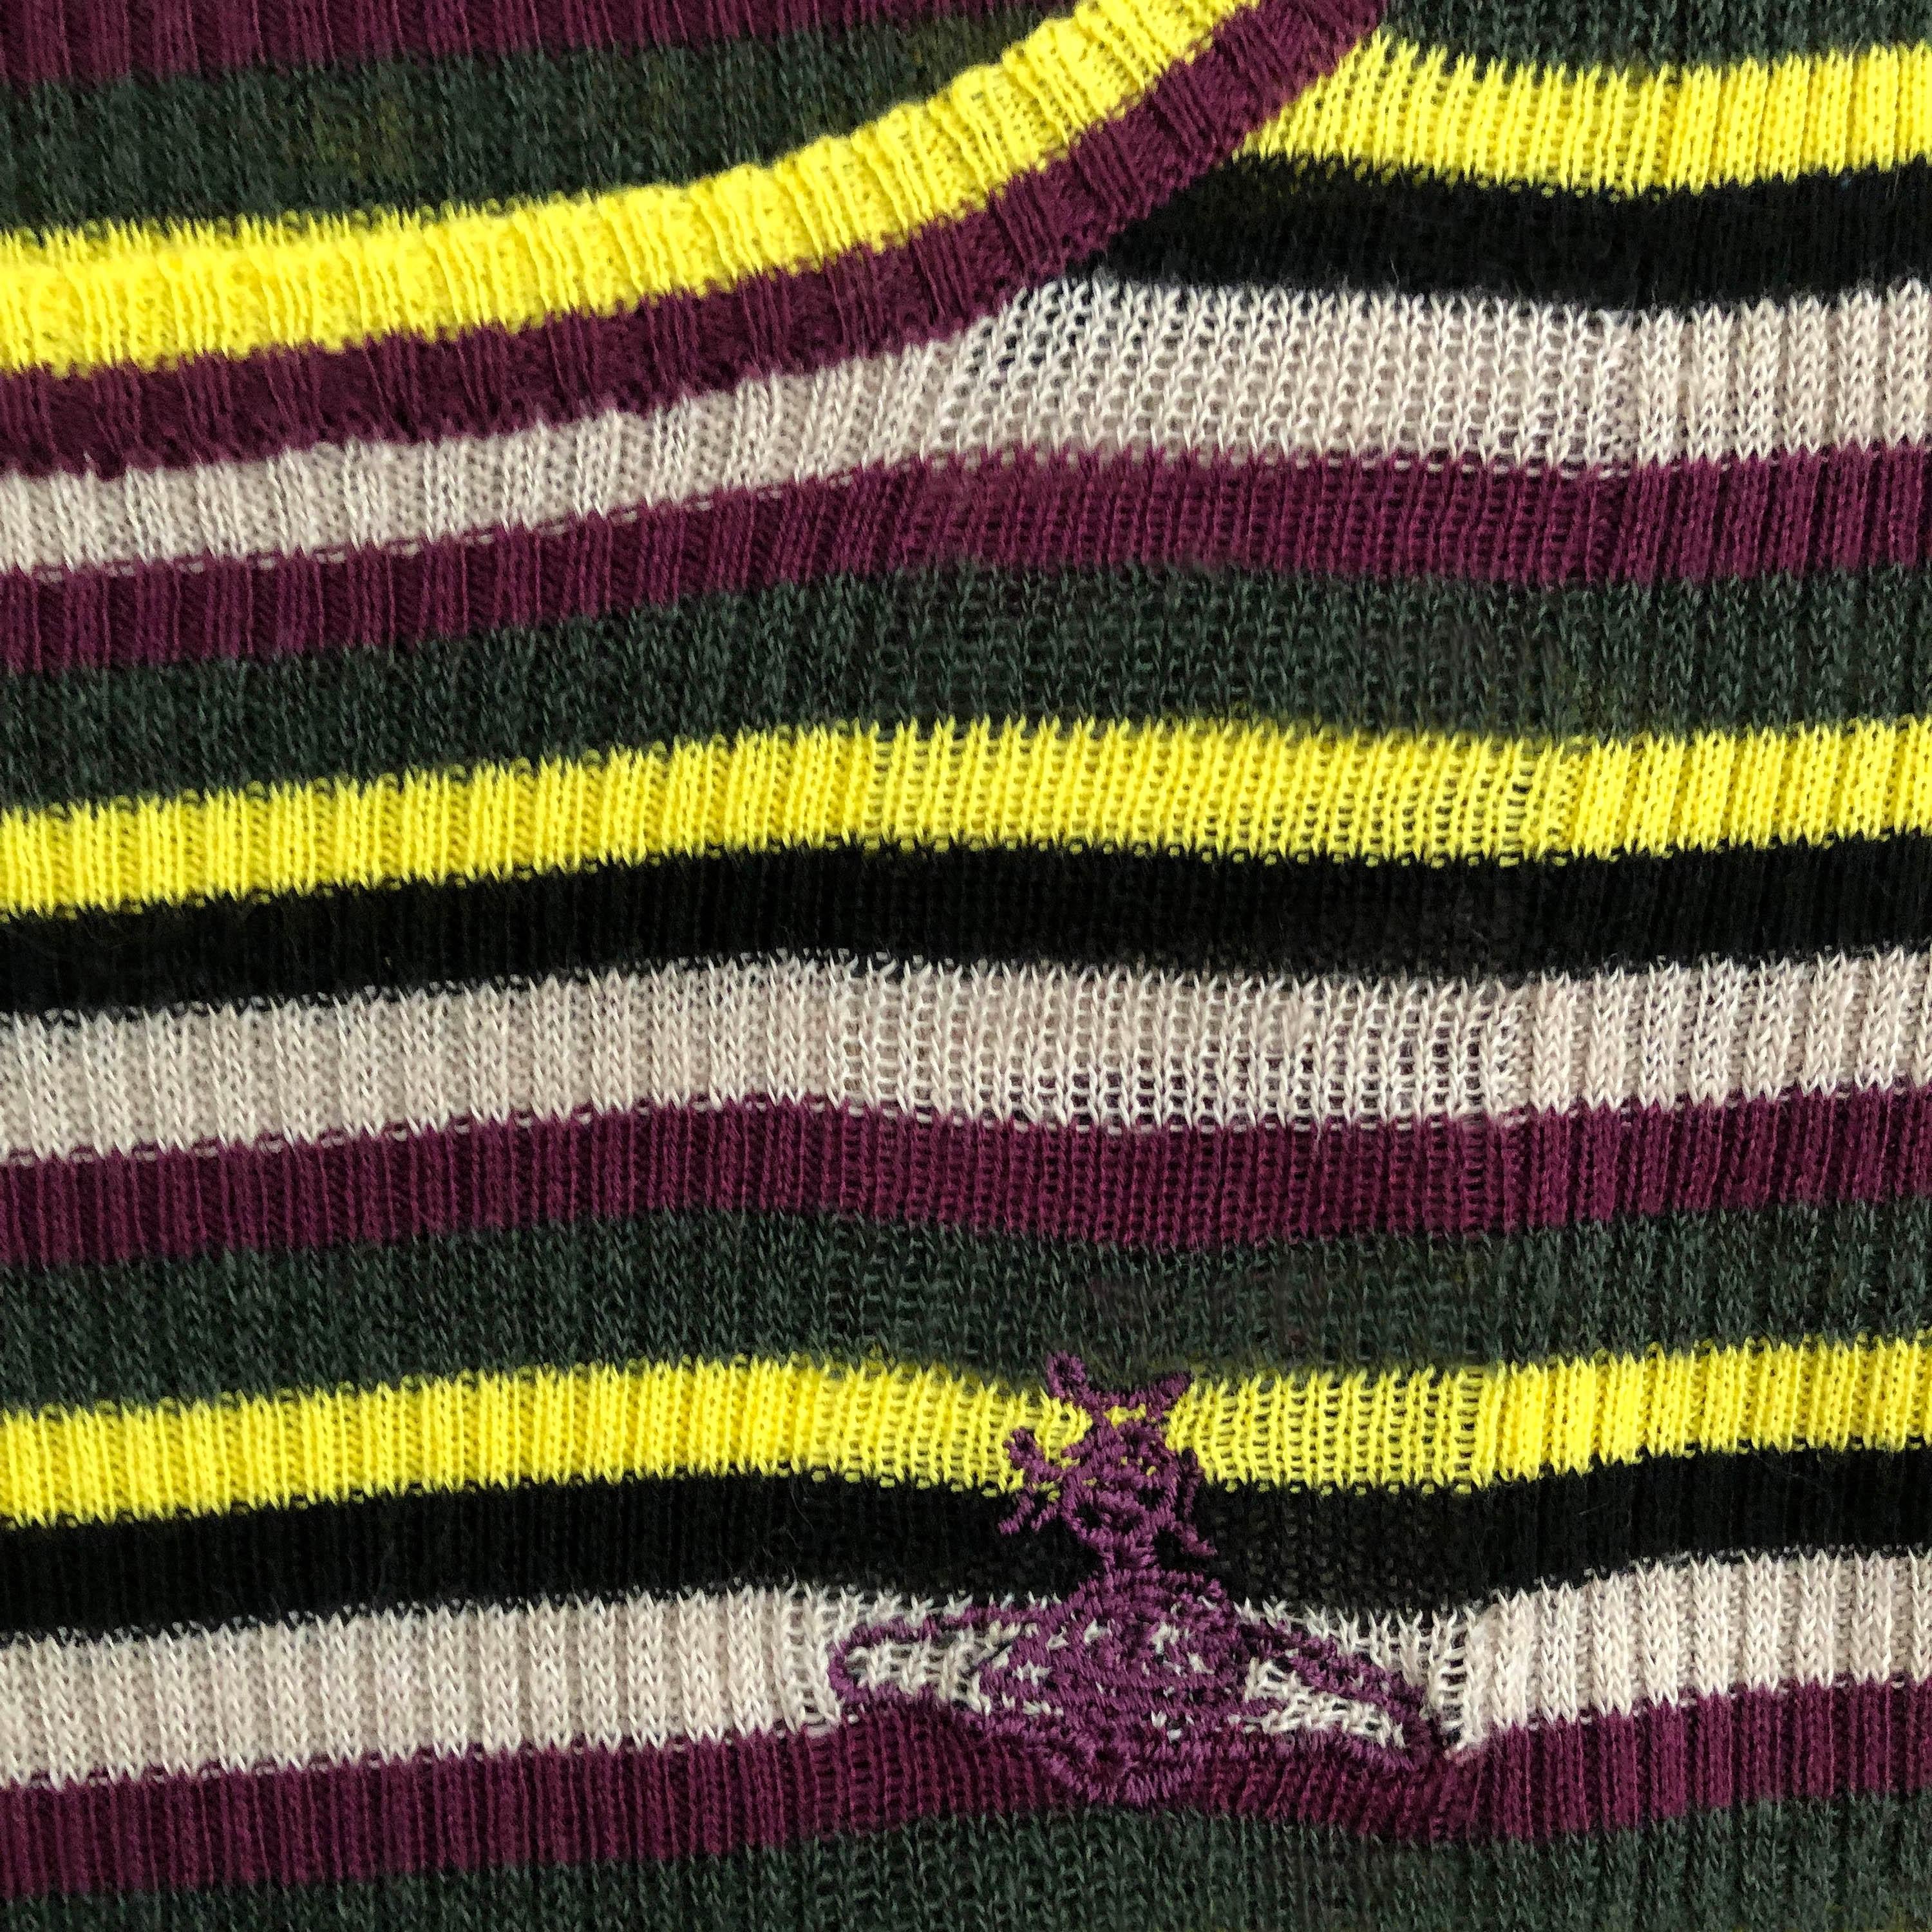 Product Details: Vivienne Westwood Dress - Multi Striped Stretch Knit - Embroidered ‘Orb’ Logo / Front Dress - Short Sleeves - Round Scooped Neck Detail 
Label: Vivienne Westwood
Size: L (Fits UK 8 to UK 12)
Fabric Content: Yellow, Aubergine, Black